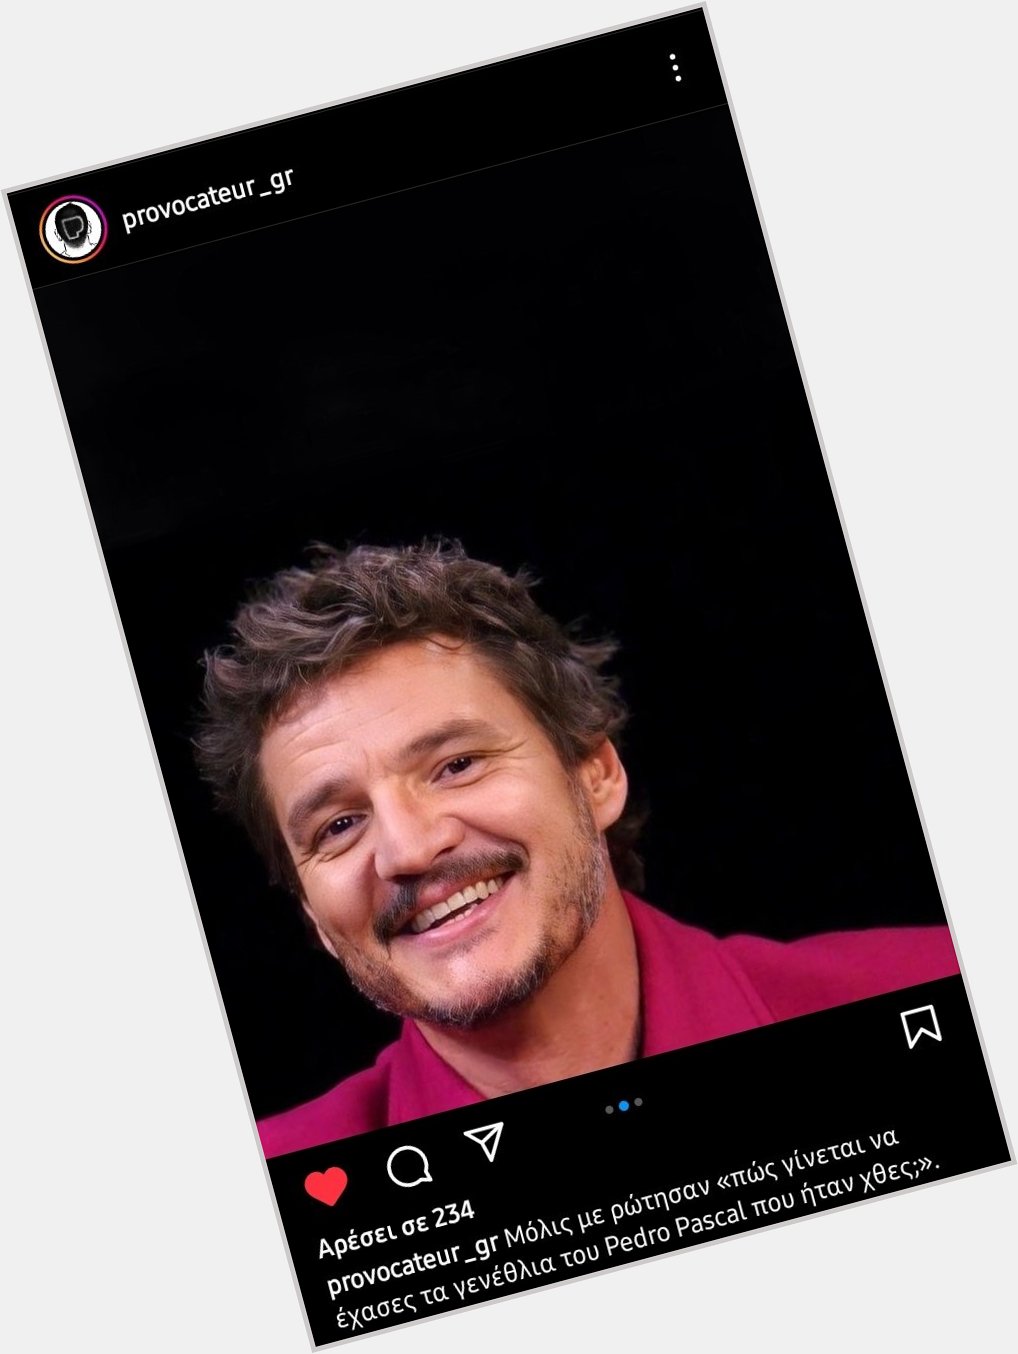 The fact that even a big greek page posted about pedro pascal\s birthday makes me emotional and happy 